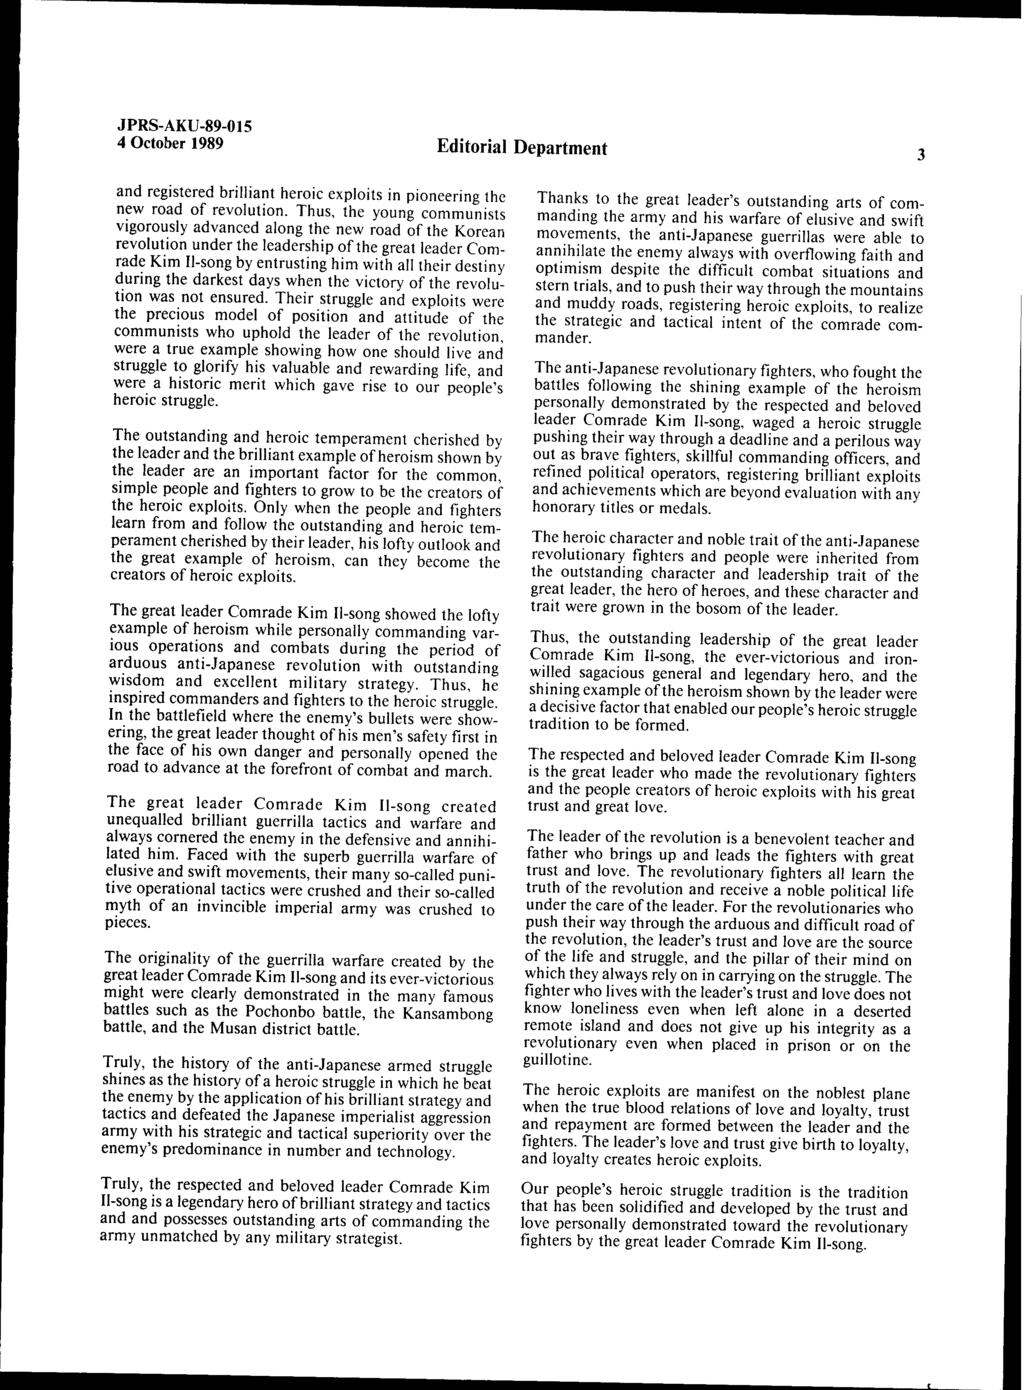 4 October 1989 Editorial Department and registered brilliant heroic exploits in pioneering the new road of revolution.